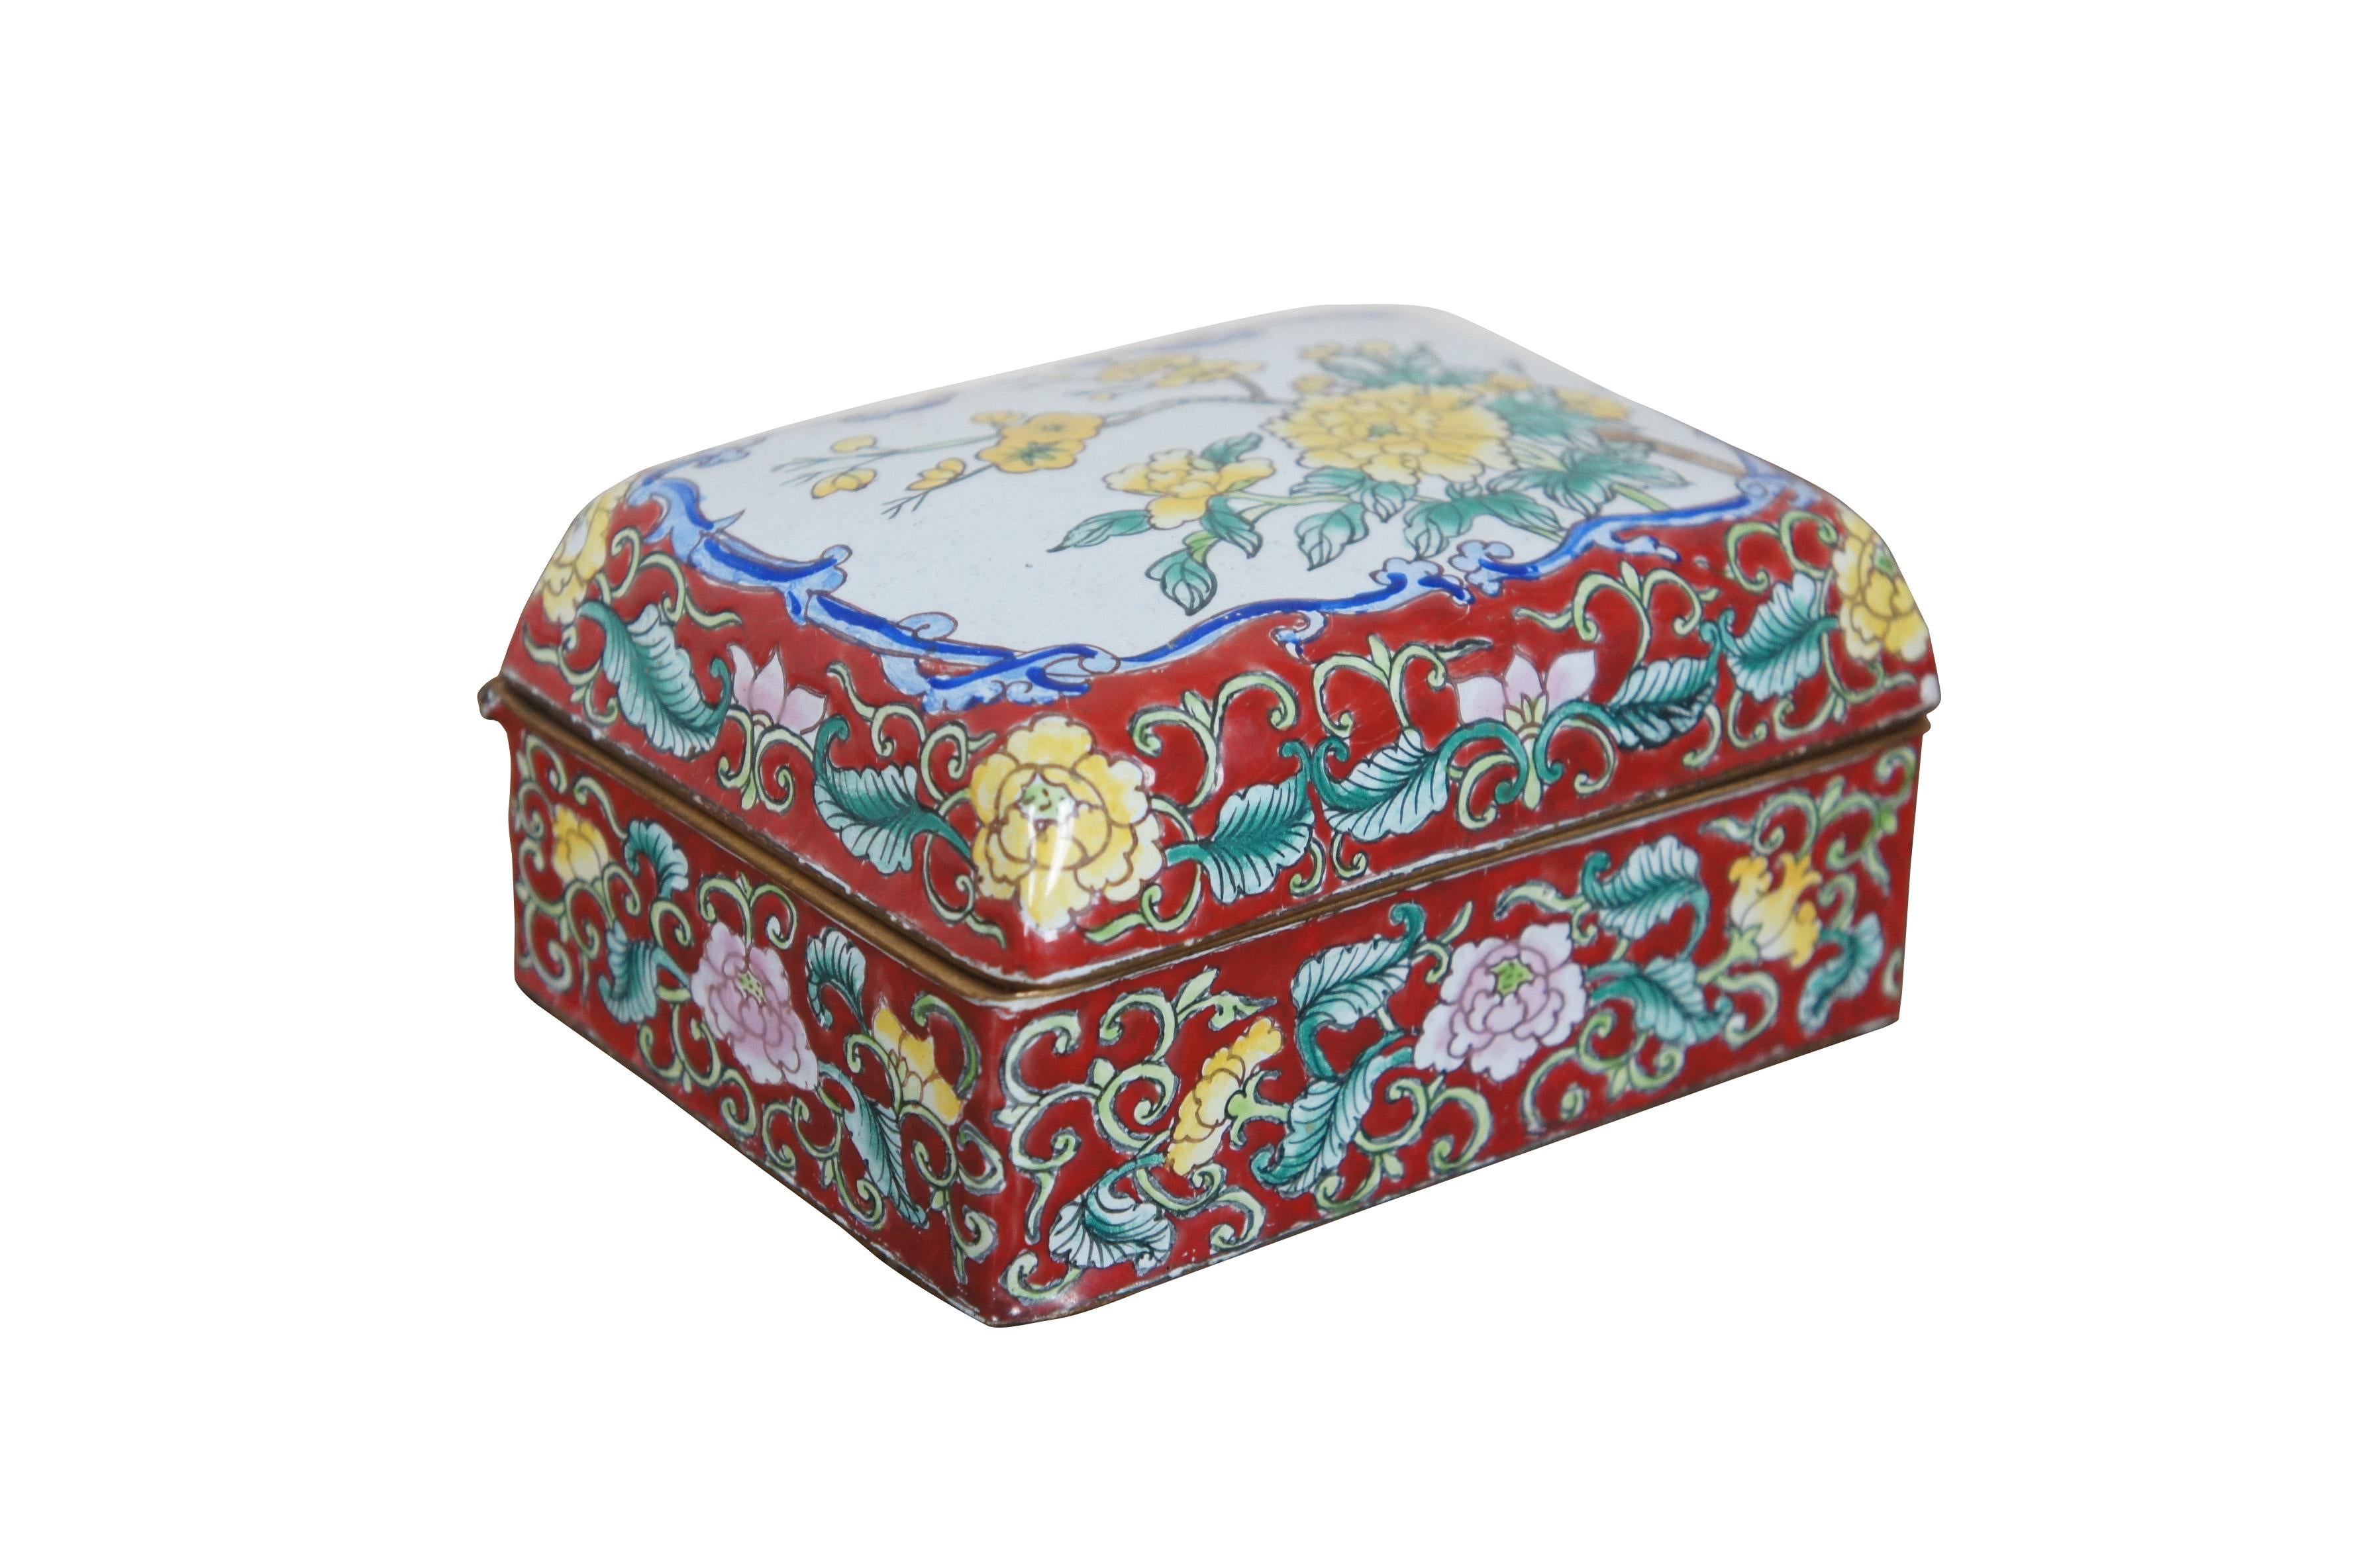 Vintage cloisonne enamel on metal Chinoiserie trinket box. Rectangular form with hinged lid, decorated in red, blue, and white with pink and yellow flowers and swirling leaves.

Dimensions:
4.625